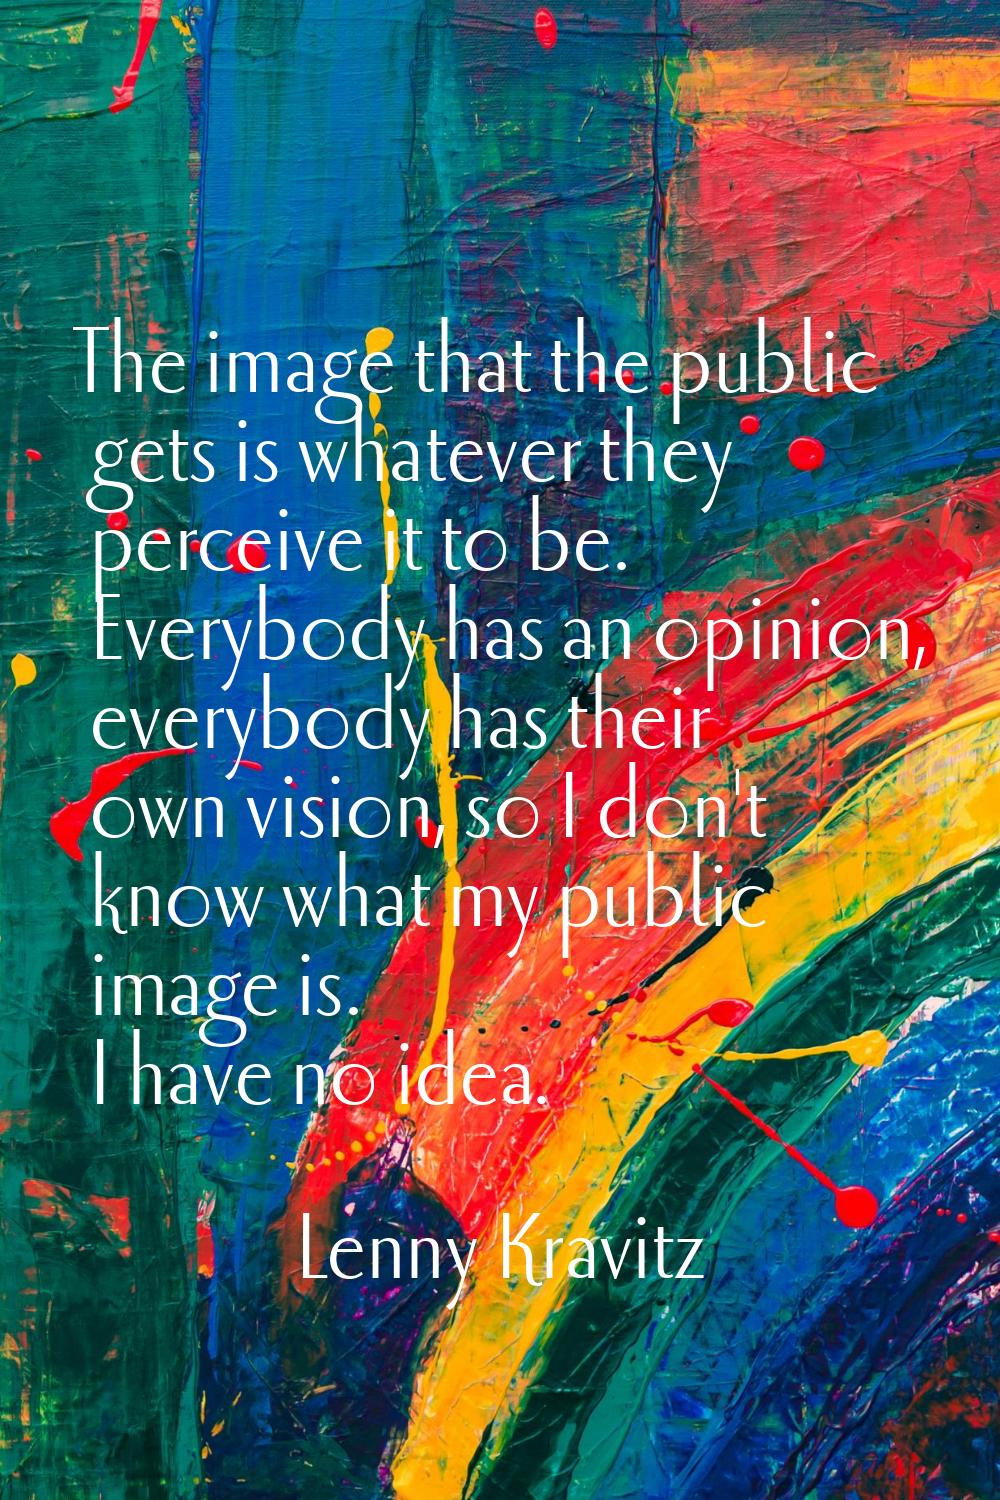 The image that the public gets is whatever they perceive it to be. Everybody has an opinion, everyb